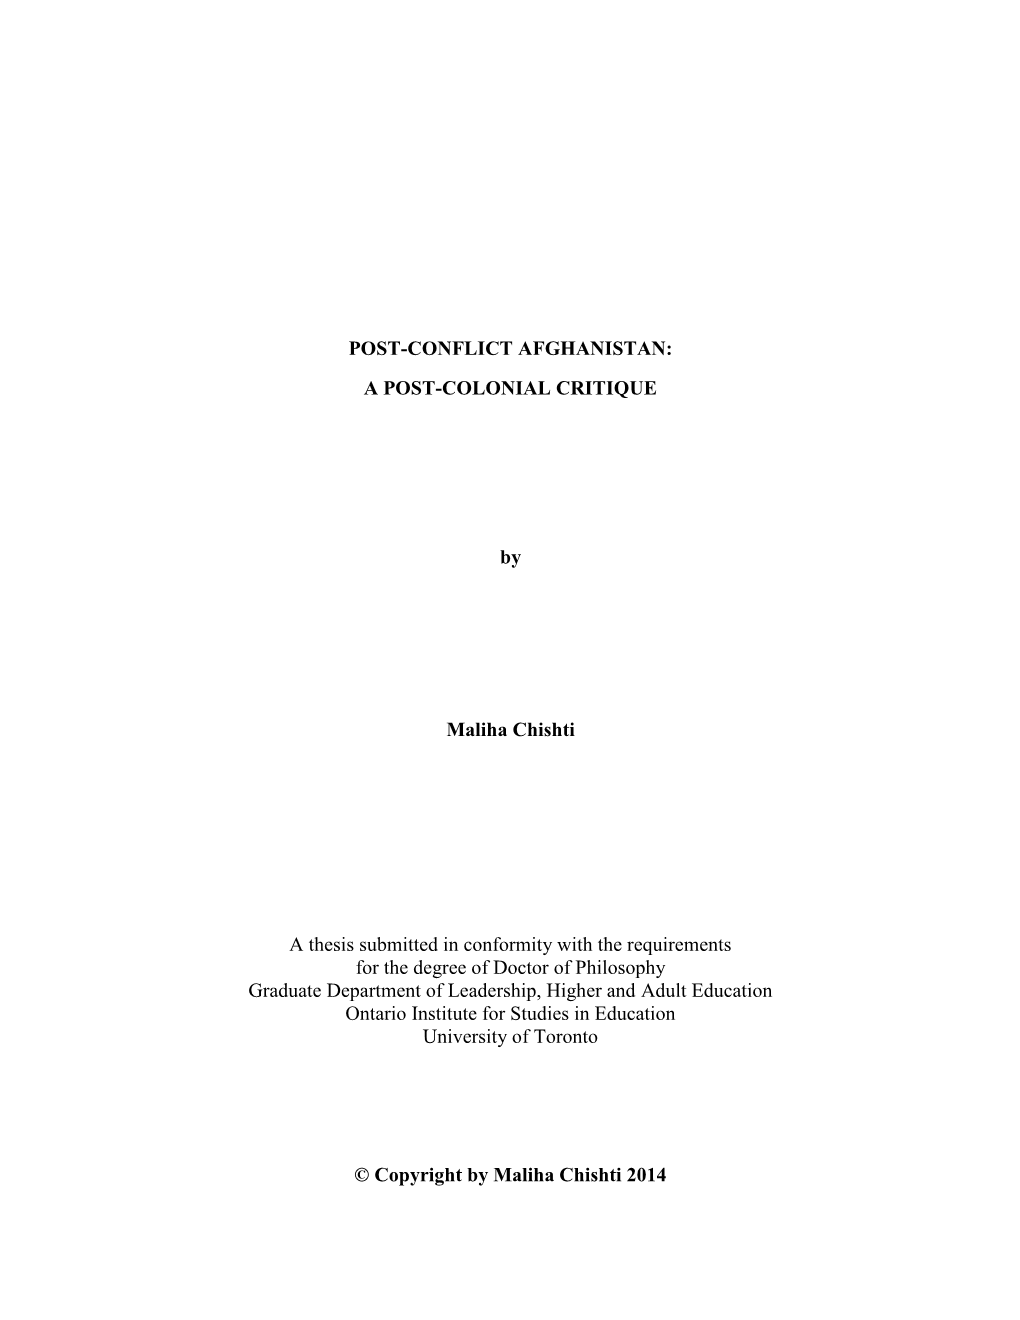 POST-CONFLICT AFGHANISTAN: a POST-COLONIAL CRITIQUE by Maliha Chishti a Thesis Submitted in Conformity with the Requirements